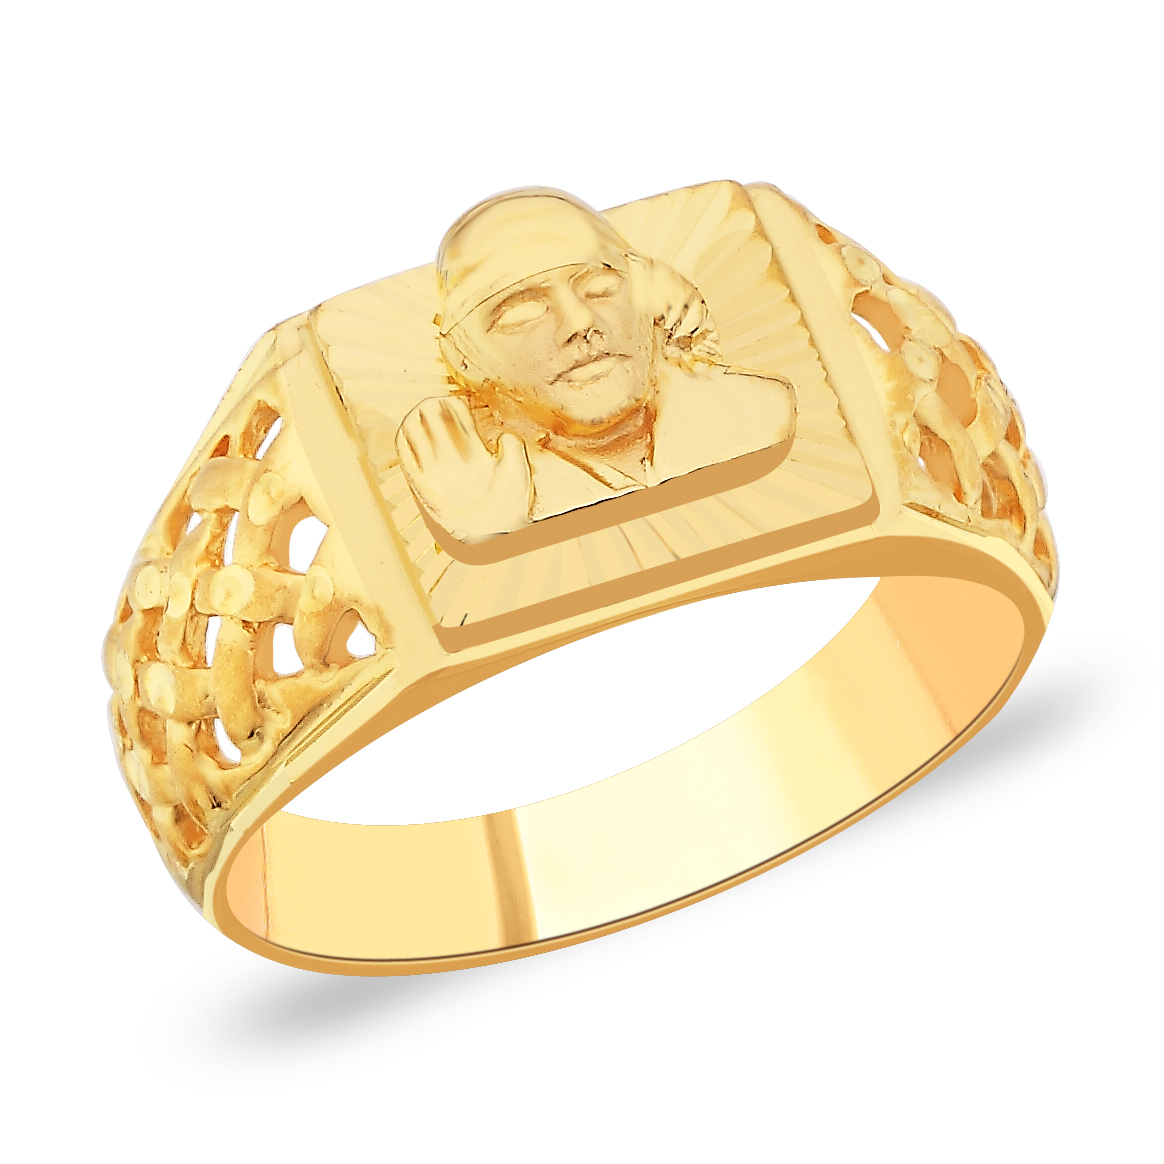 22Kt Gold Sai Baba Ring - RiMs8449 - 22kt Gold Mens Ring with religious Sai  Baba Idol designed with Frosty finish.